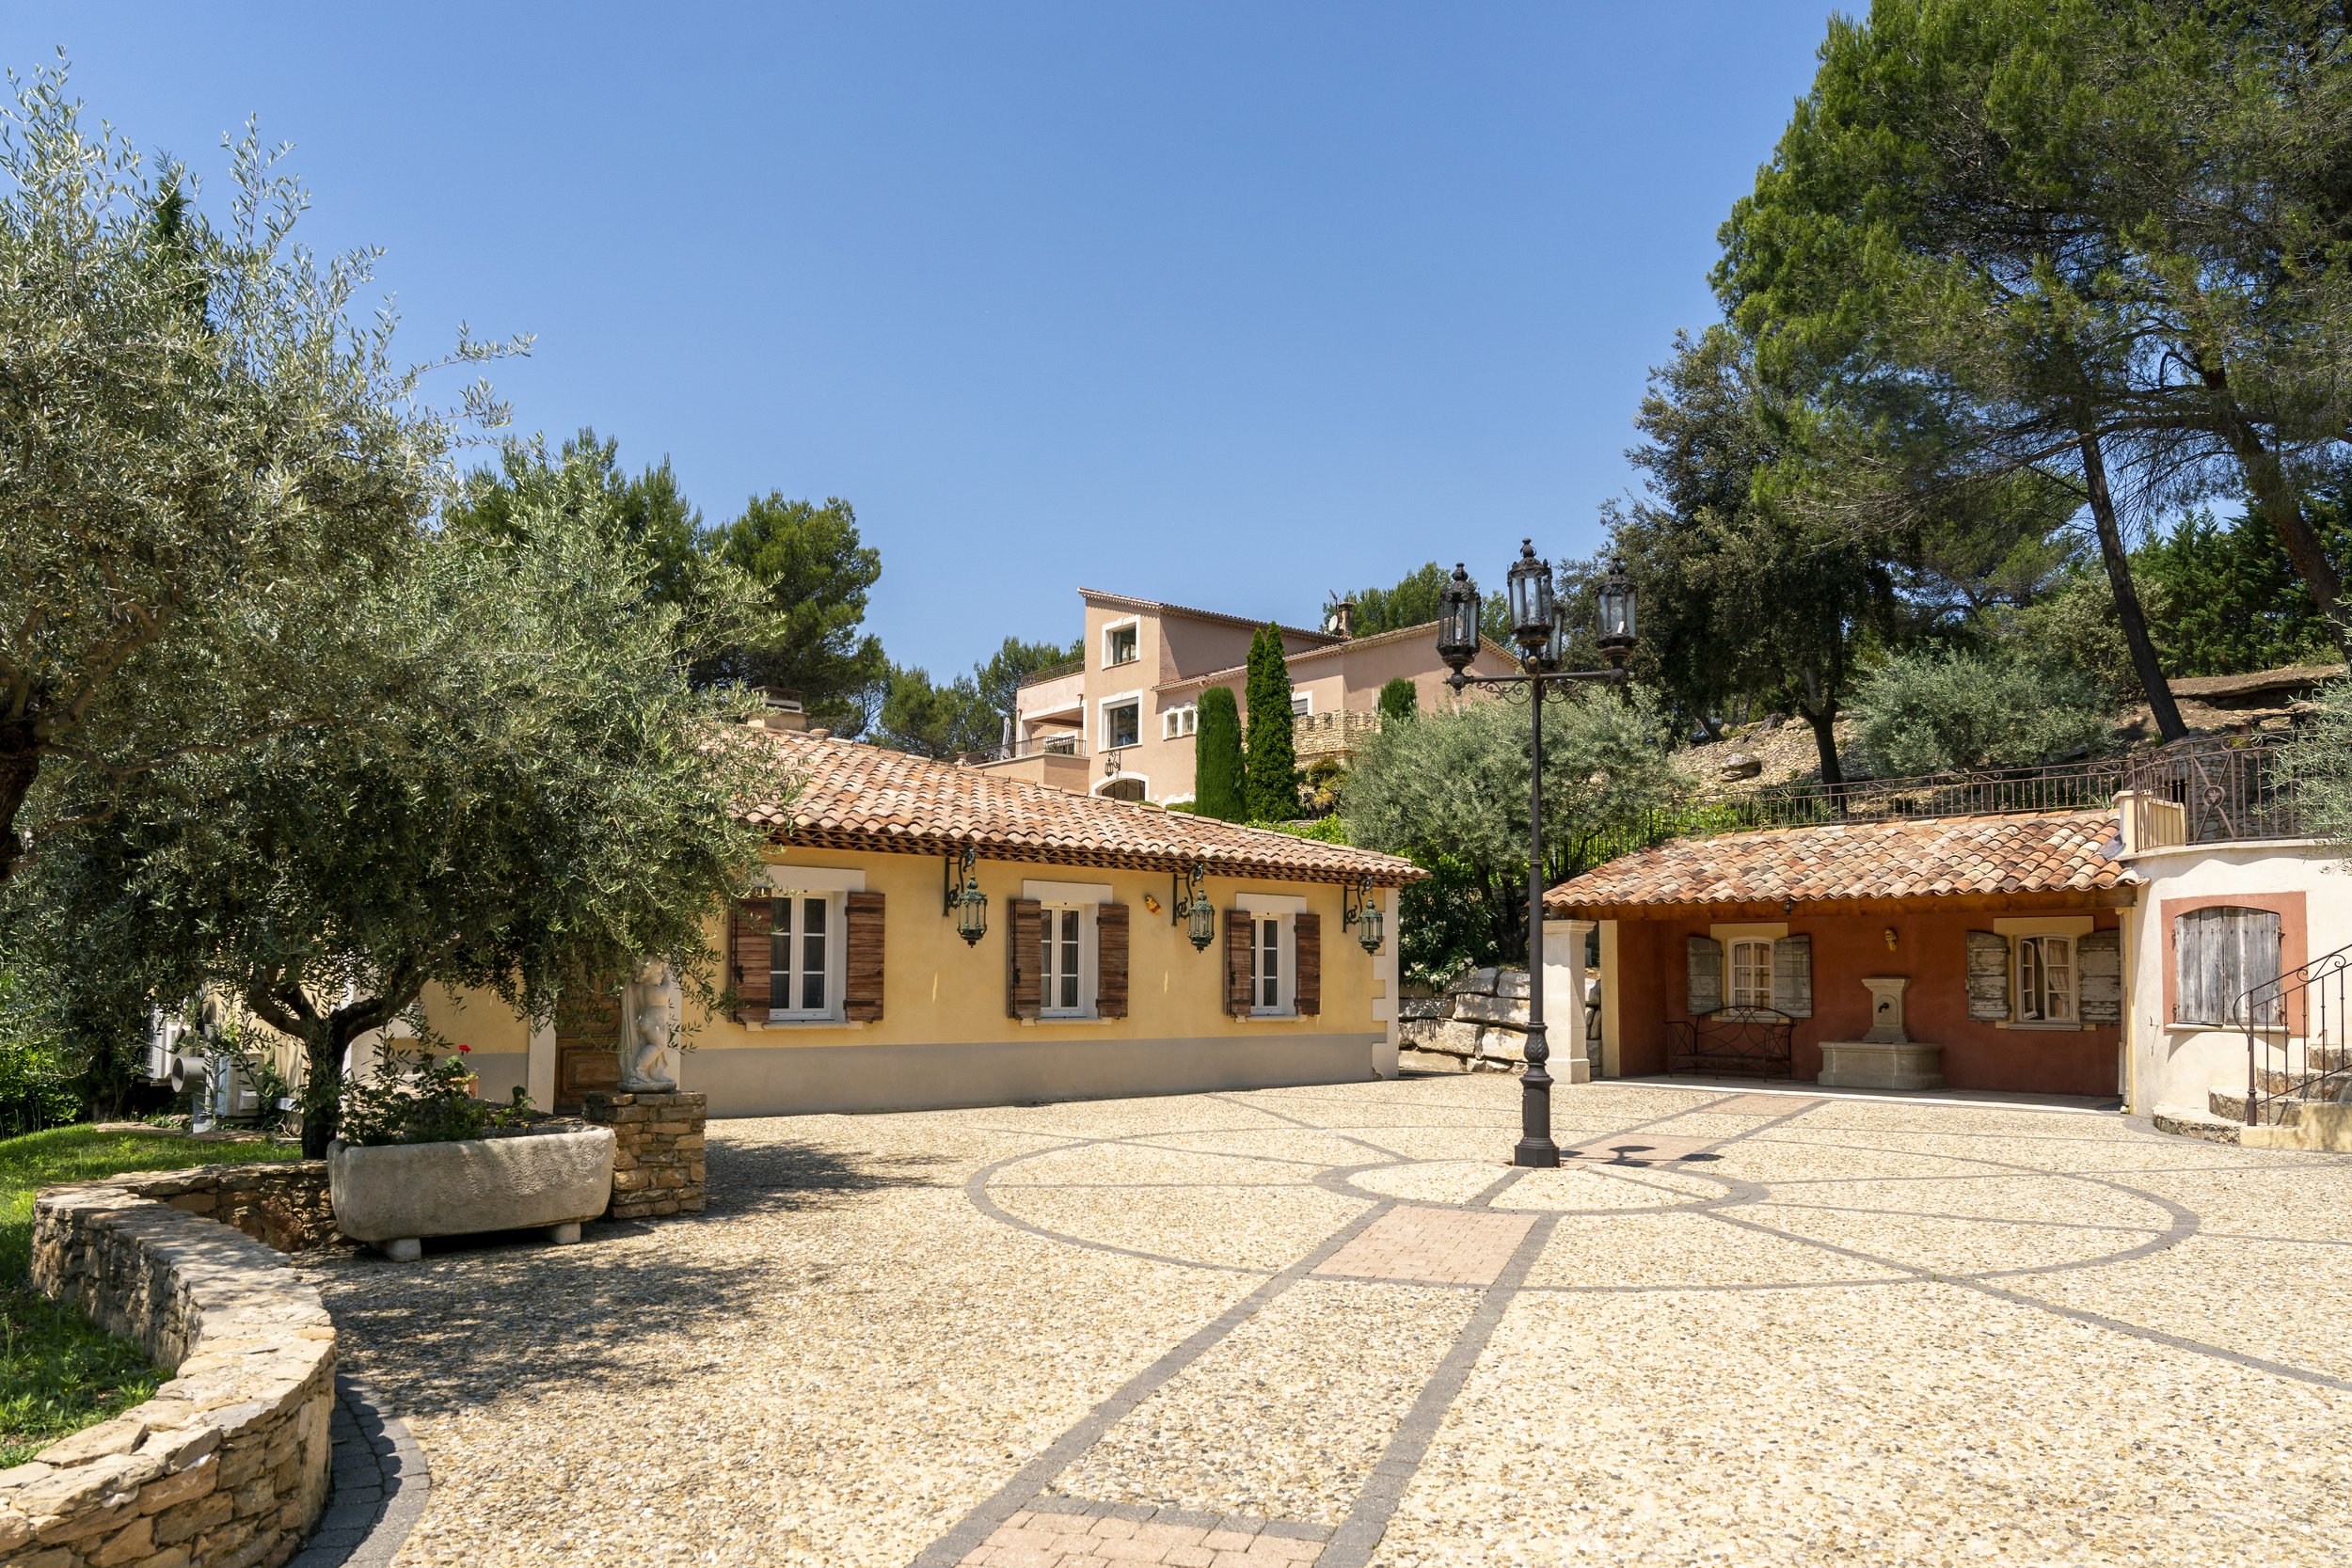 Francis York French Country House in the Vaucluse Region of Provence 00010.JPG